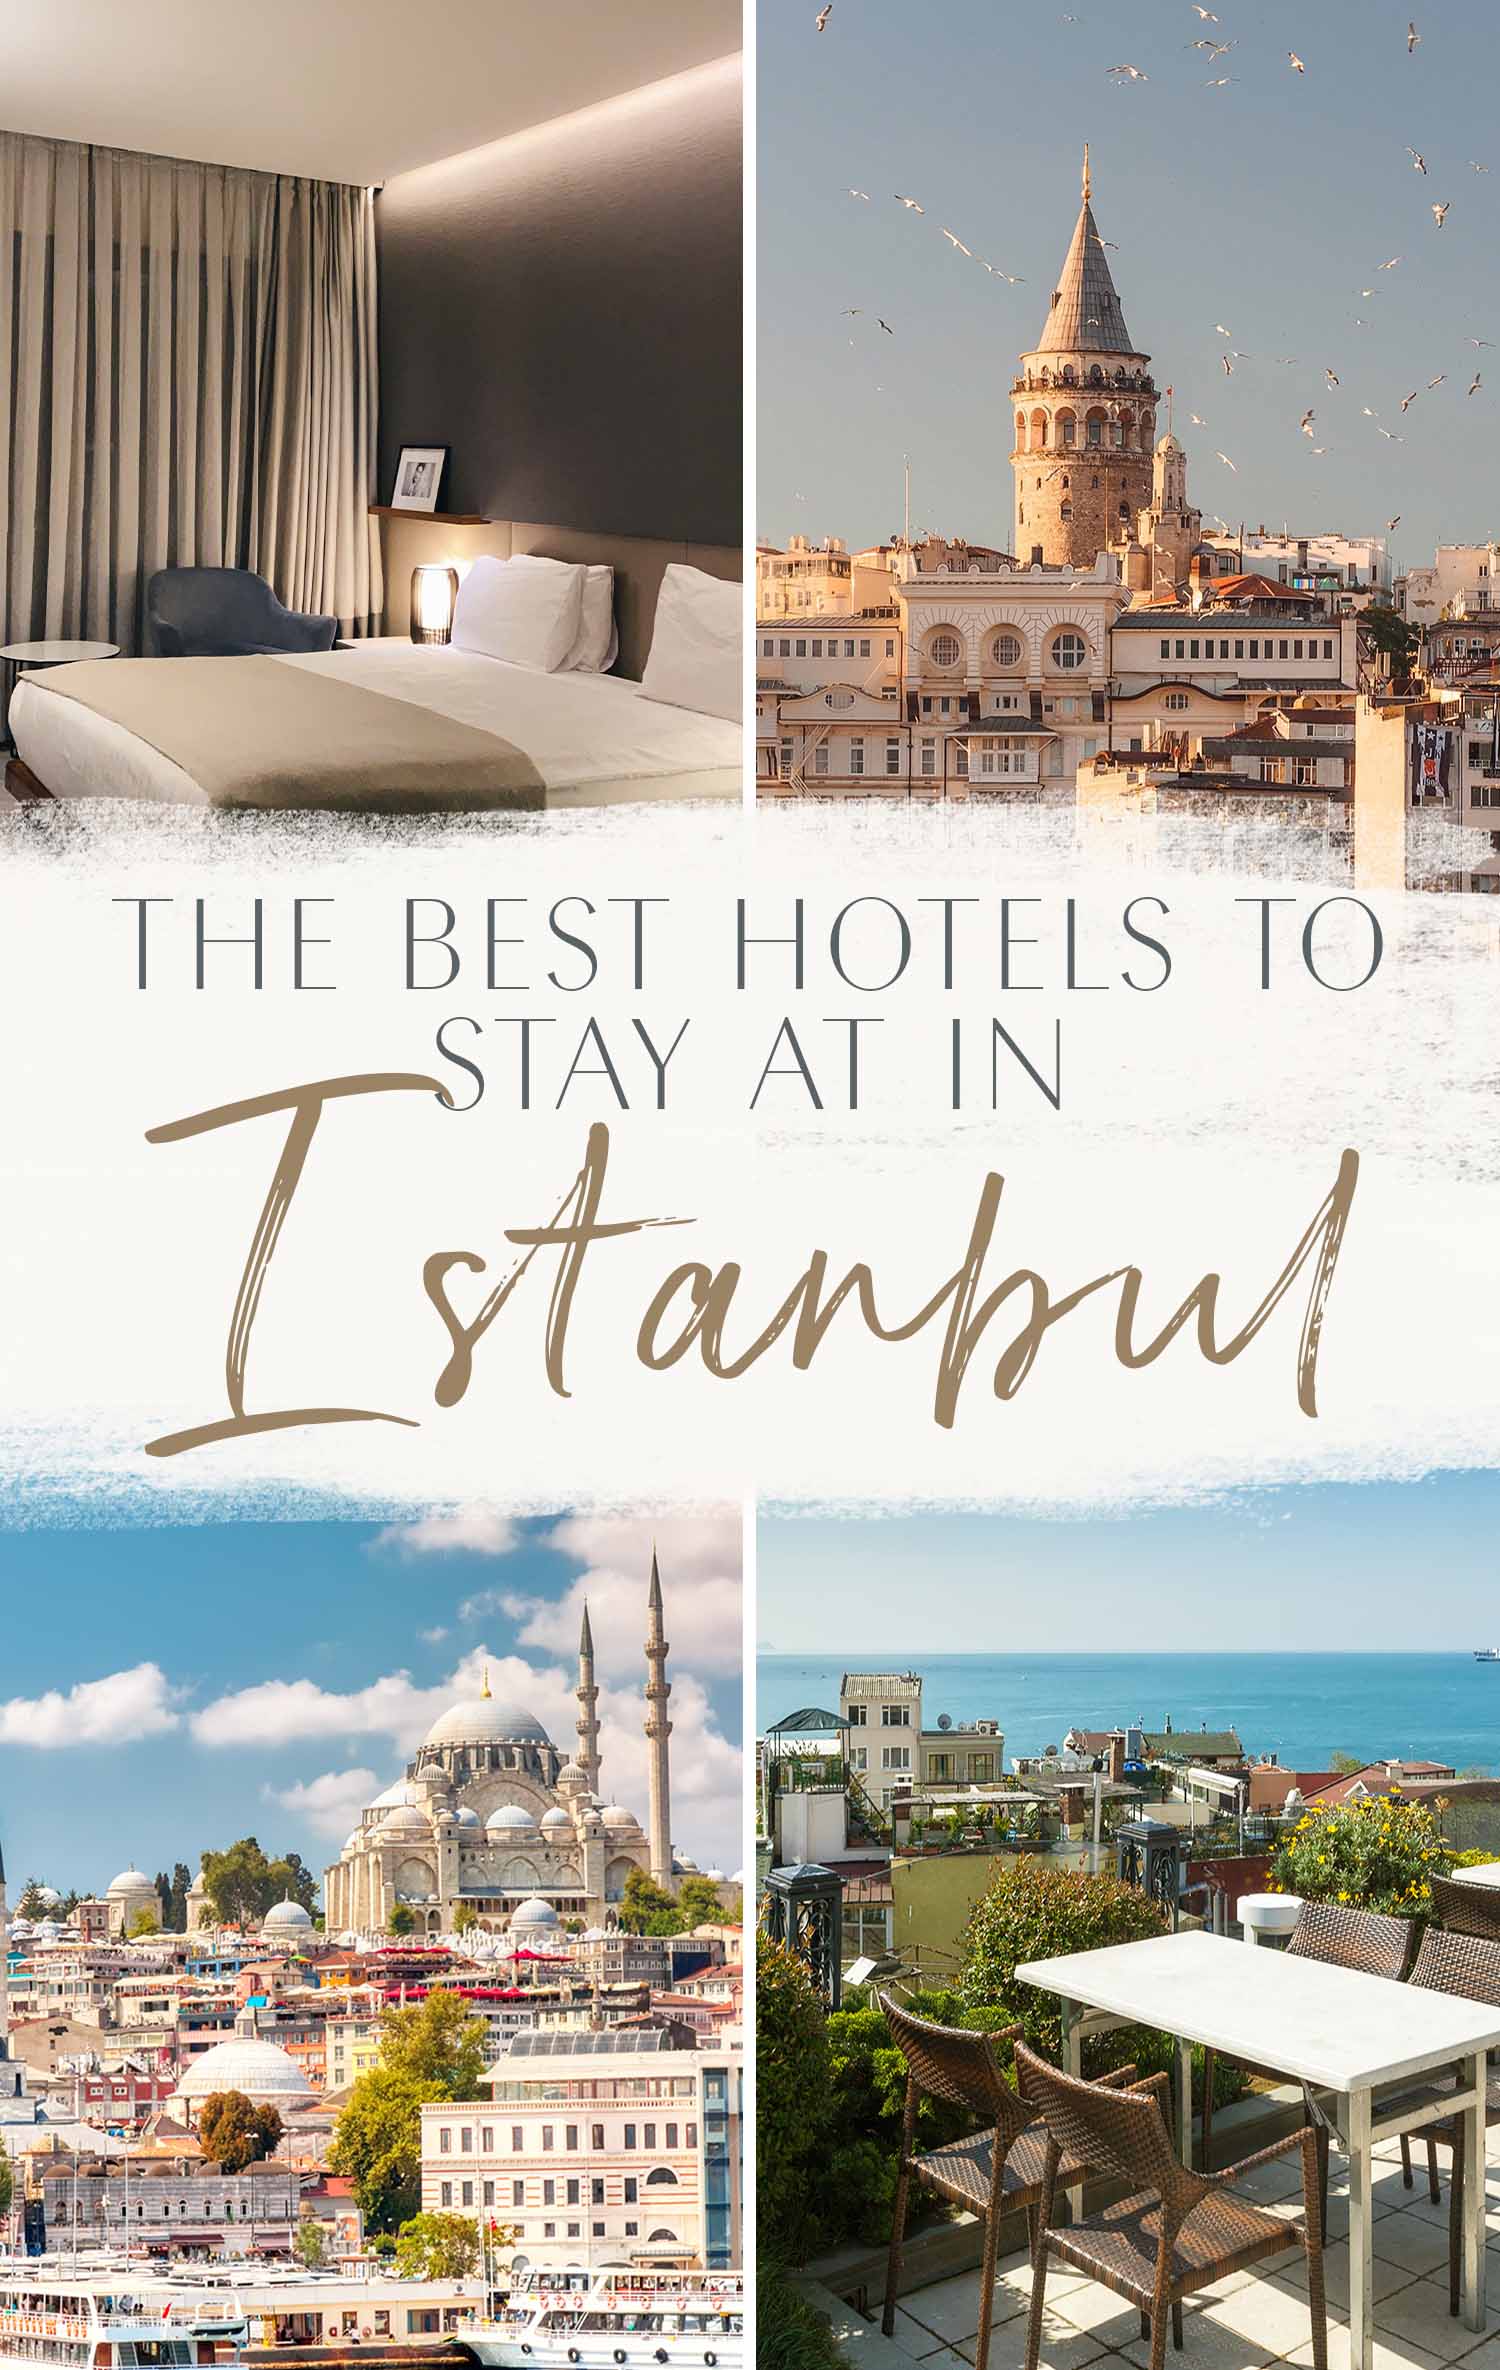 The Best Hotels to Stay at in Istanbul